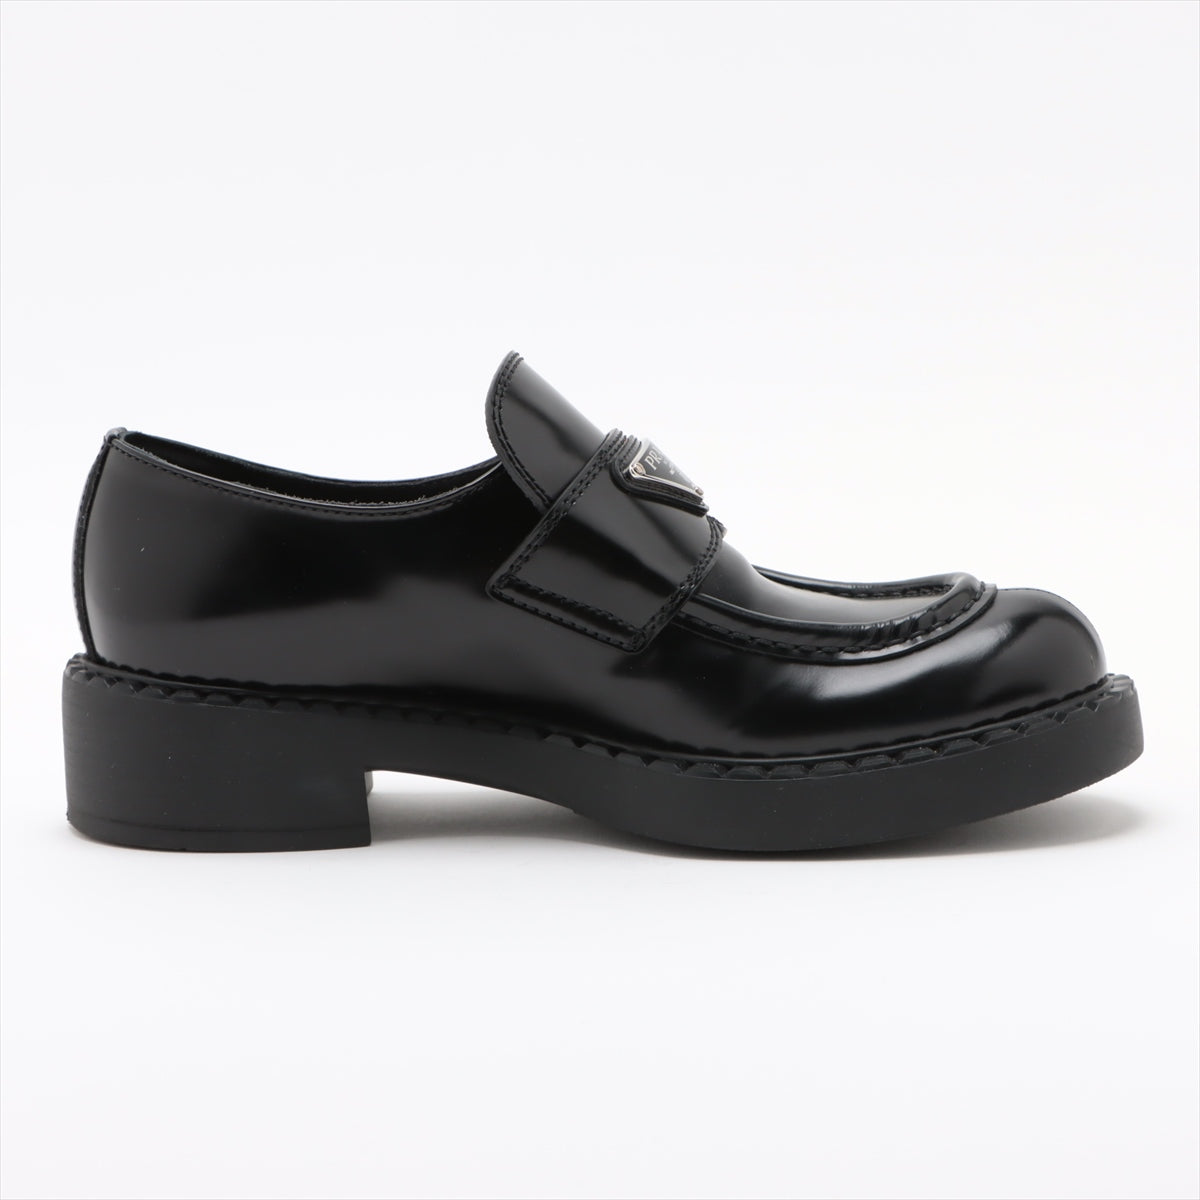 Prada Chocolate Leather Loafer 37 1/2 Ladies' Black Triangle logo box There is a bag